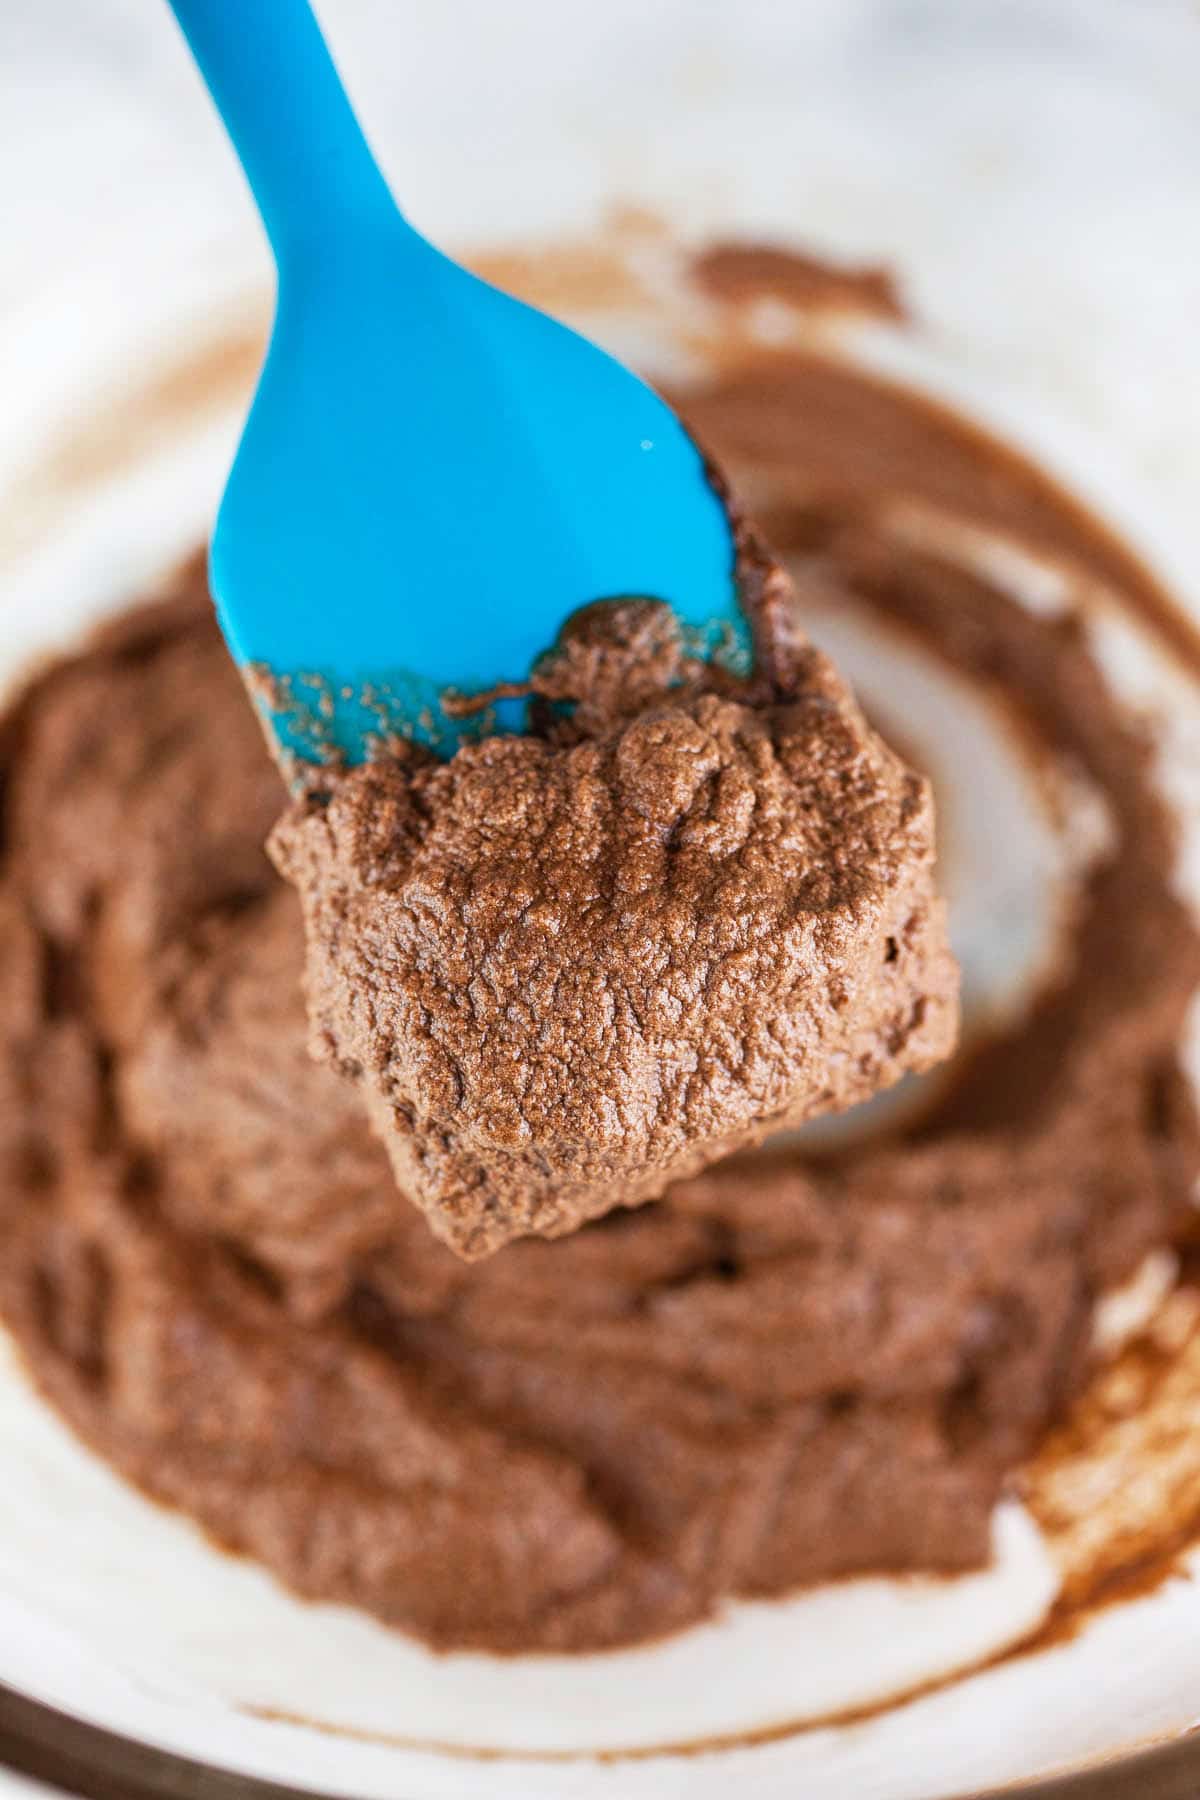 Chocolate frosting on blue spatula lifted from small glass bowl.